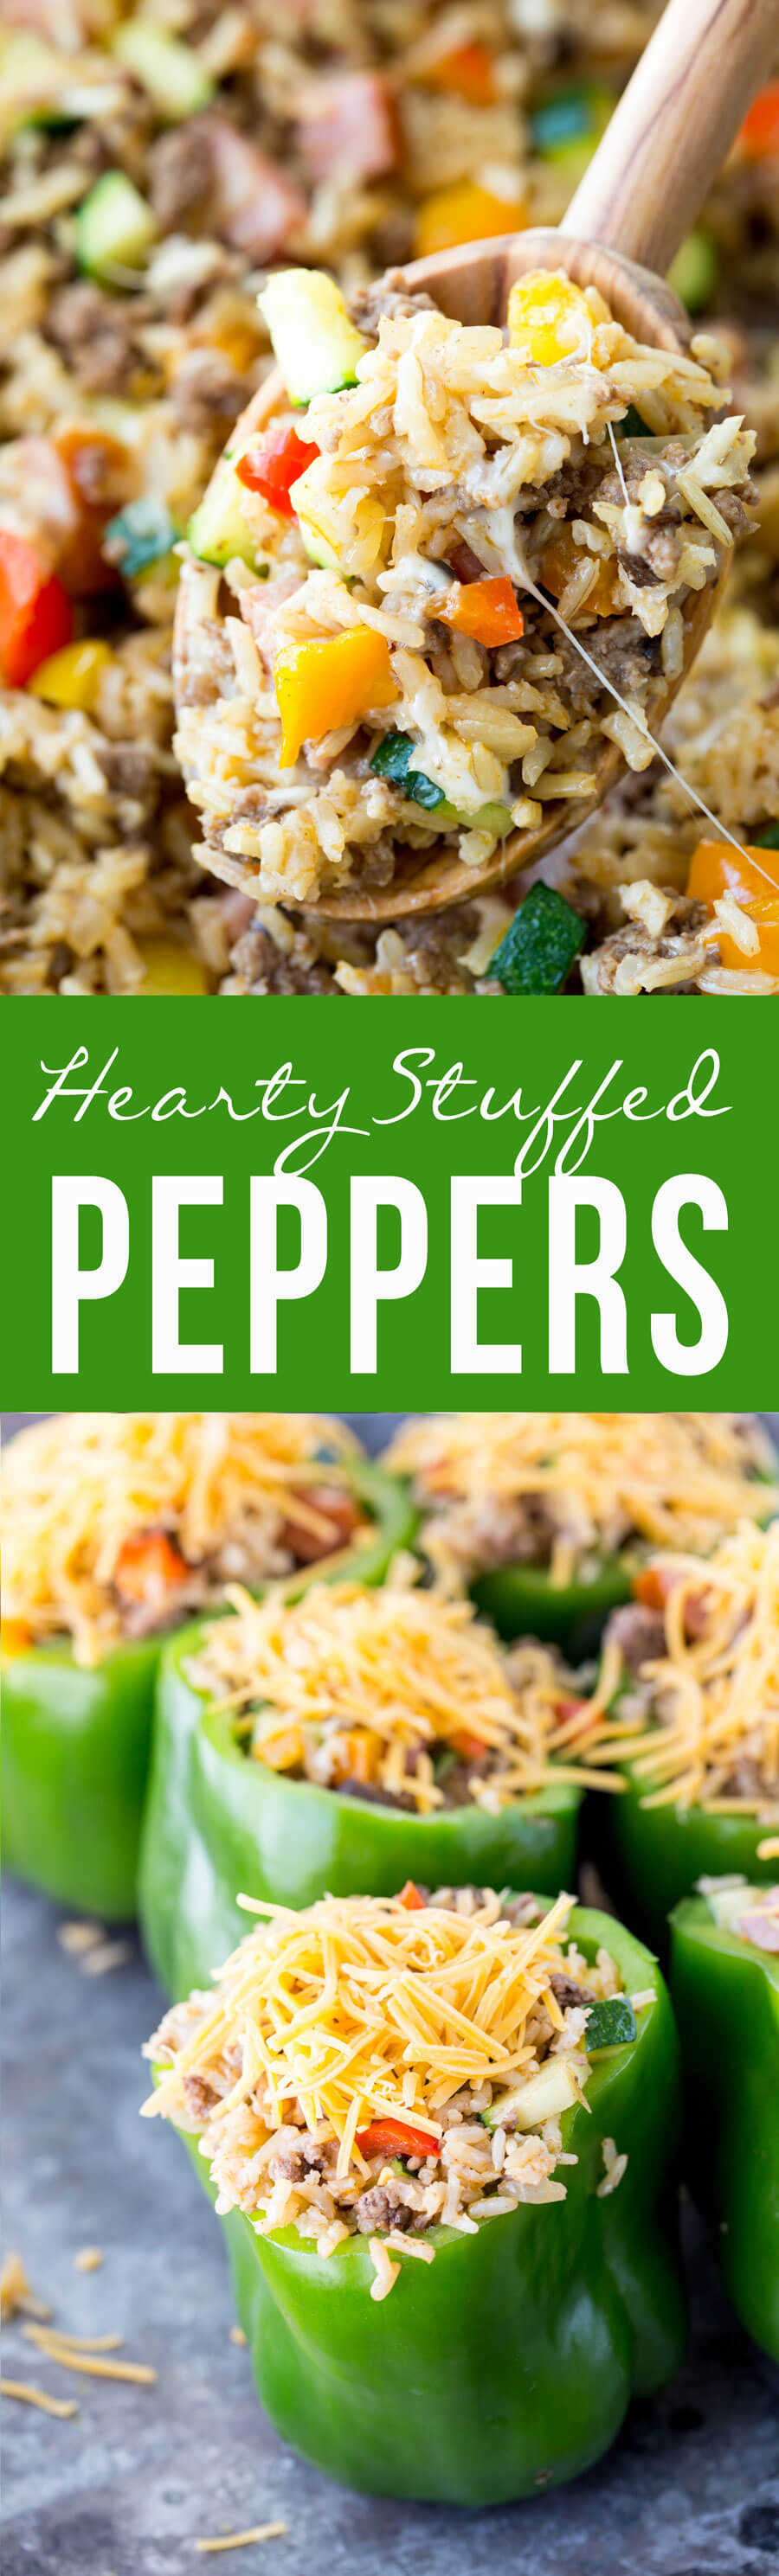 Hearty stuffed peppers are loaded with sausage, beef, veggies and brown rice